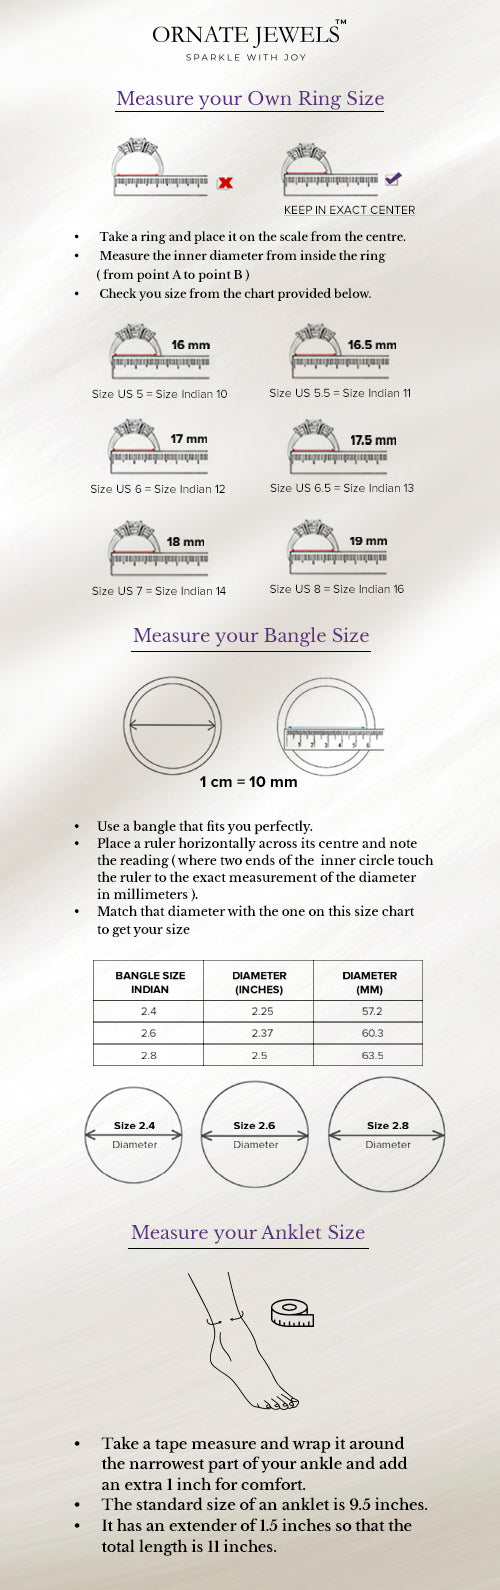 measure your own ring size